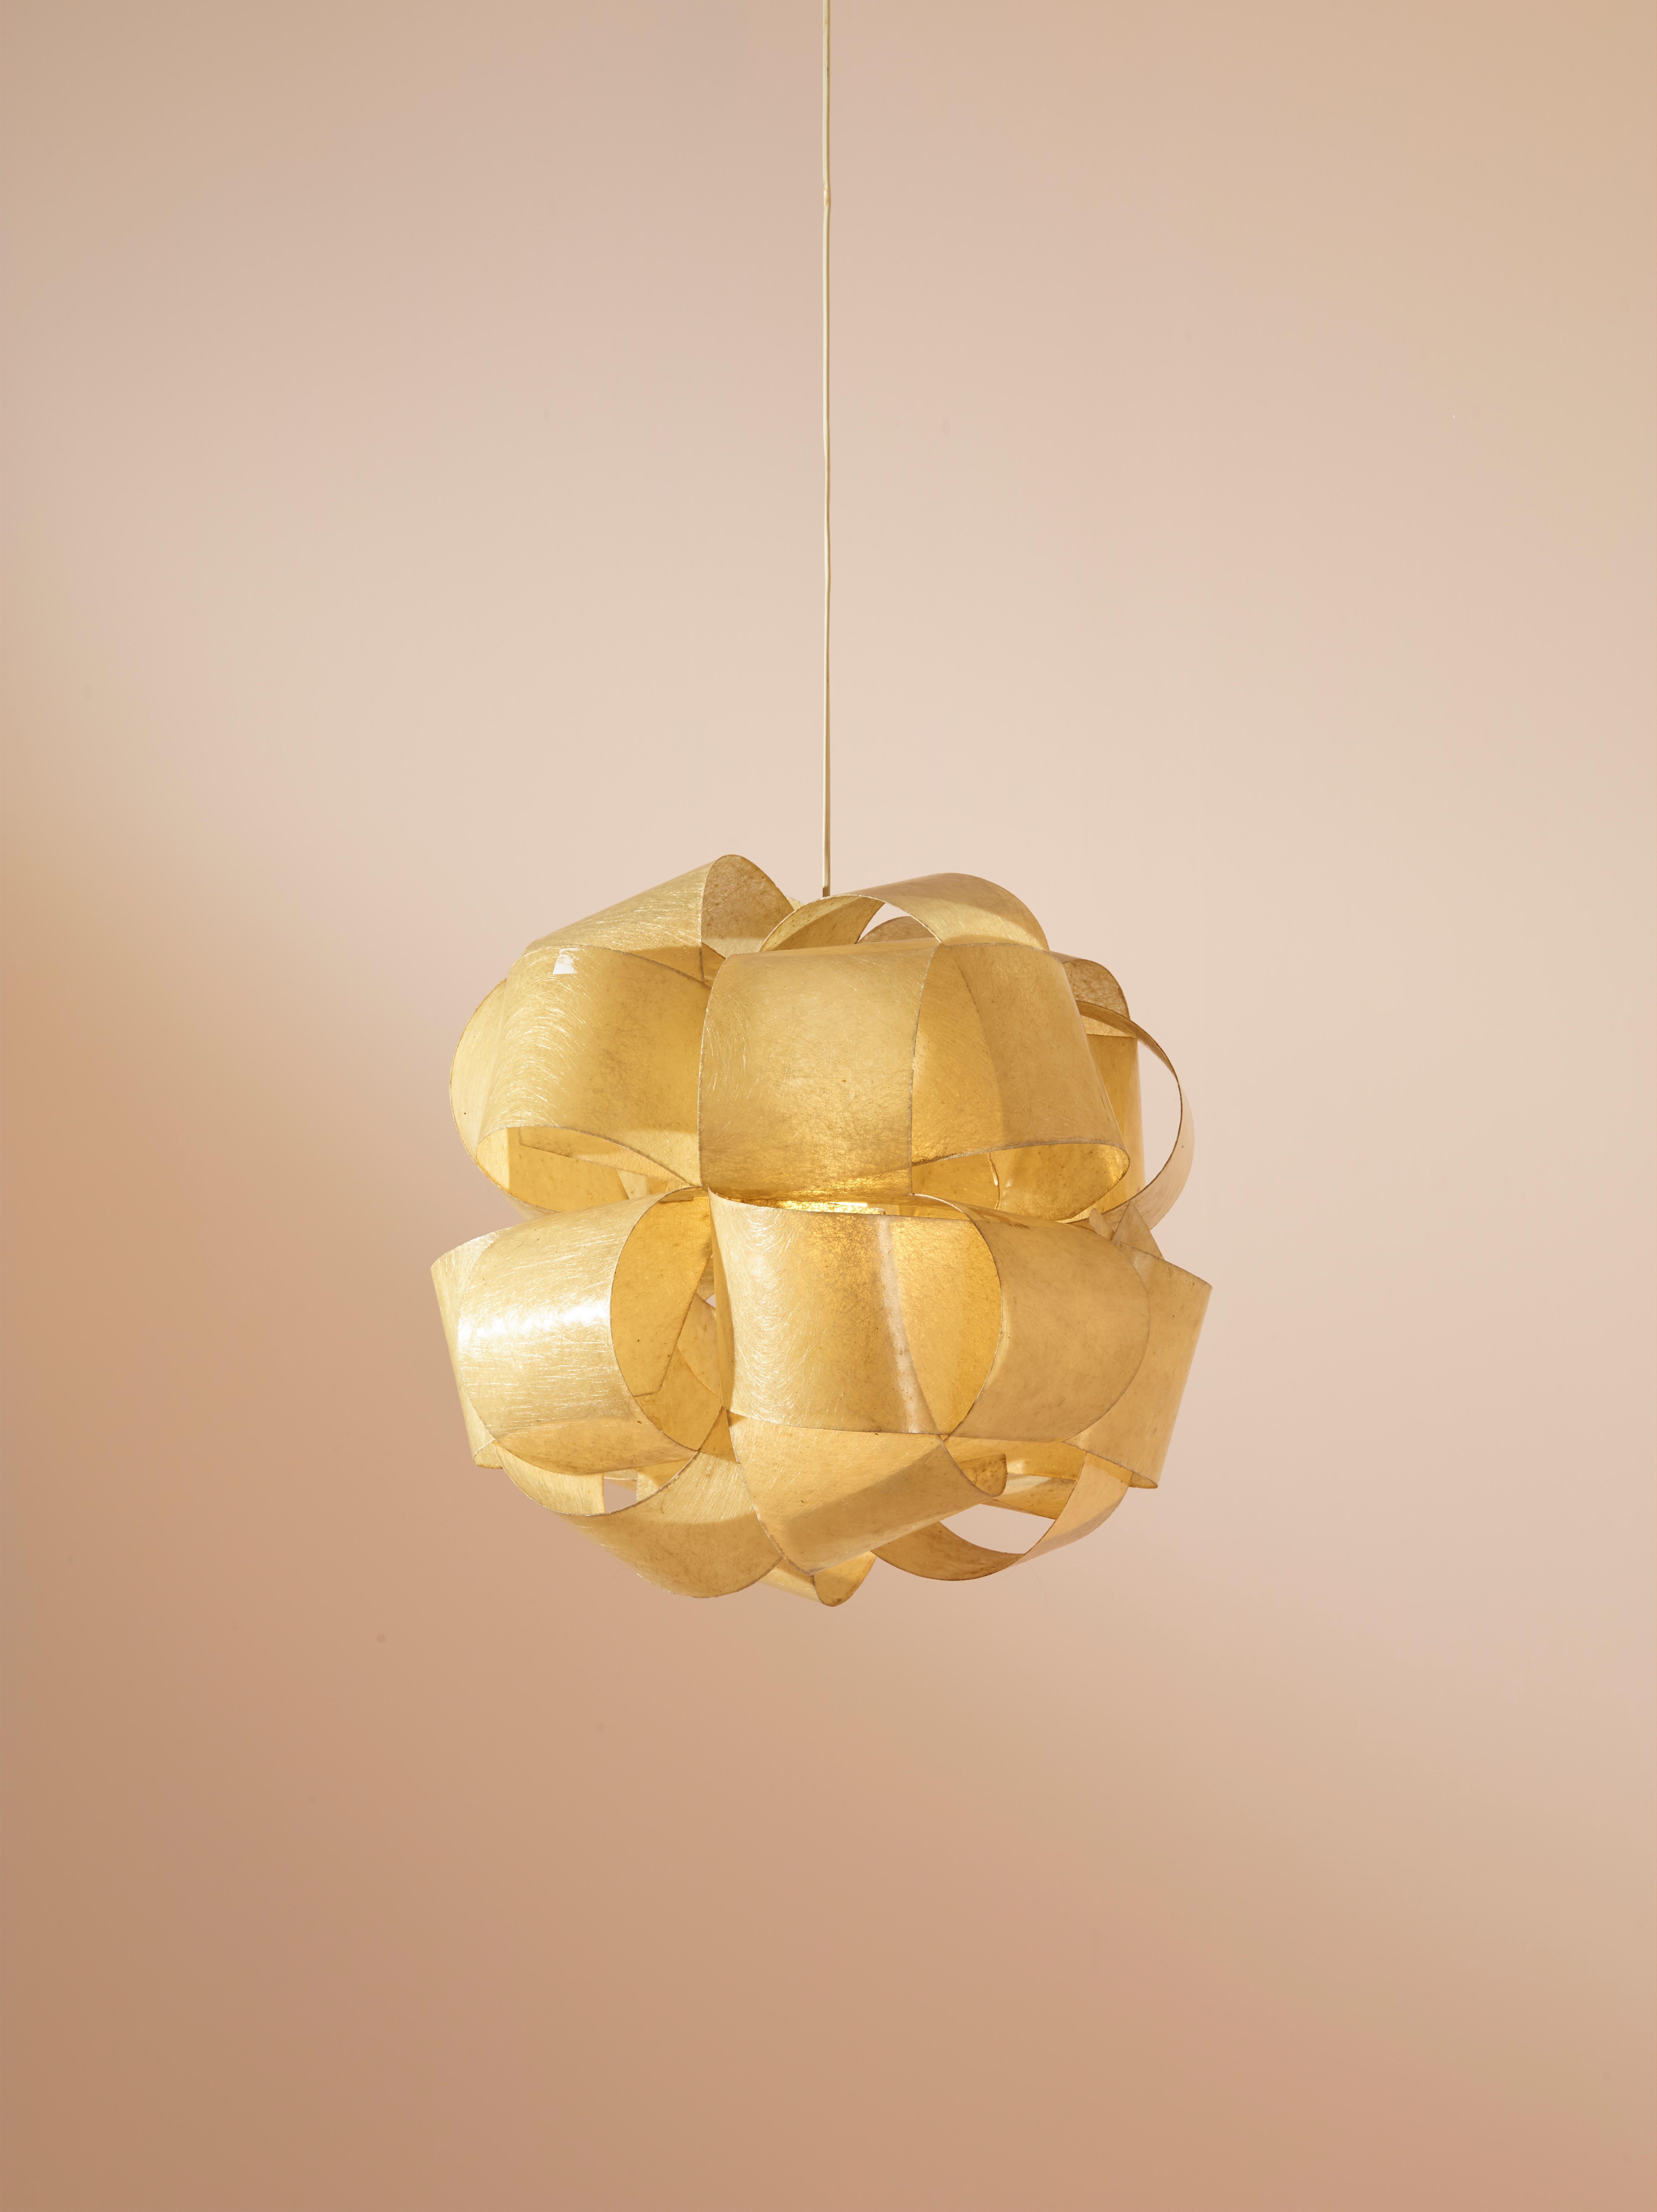 Rare 'Spire' (spirals) ceiling light by Enrico Botta for Diner. Designed and manufactured in Italy, 1970. 

Made of curved and intertwined fiberglass sheets which are held together by a smart metal plug-in system, it mimics the elegant shape of a